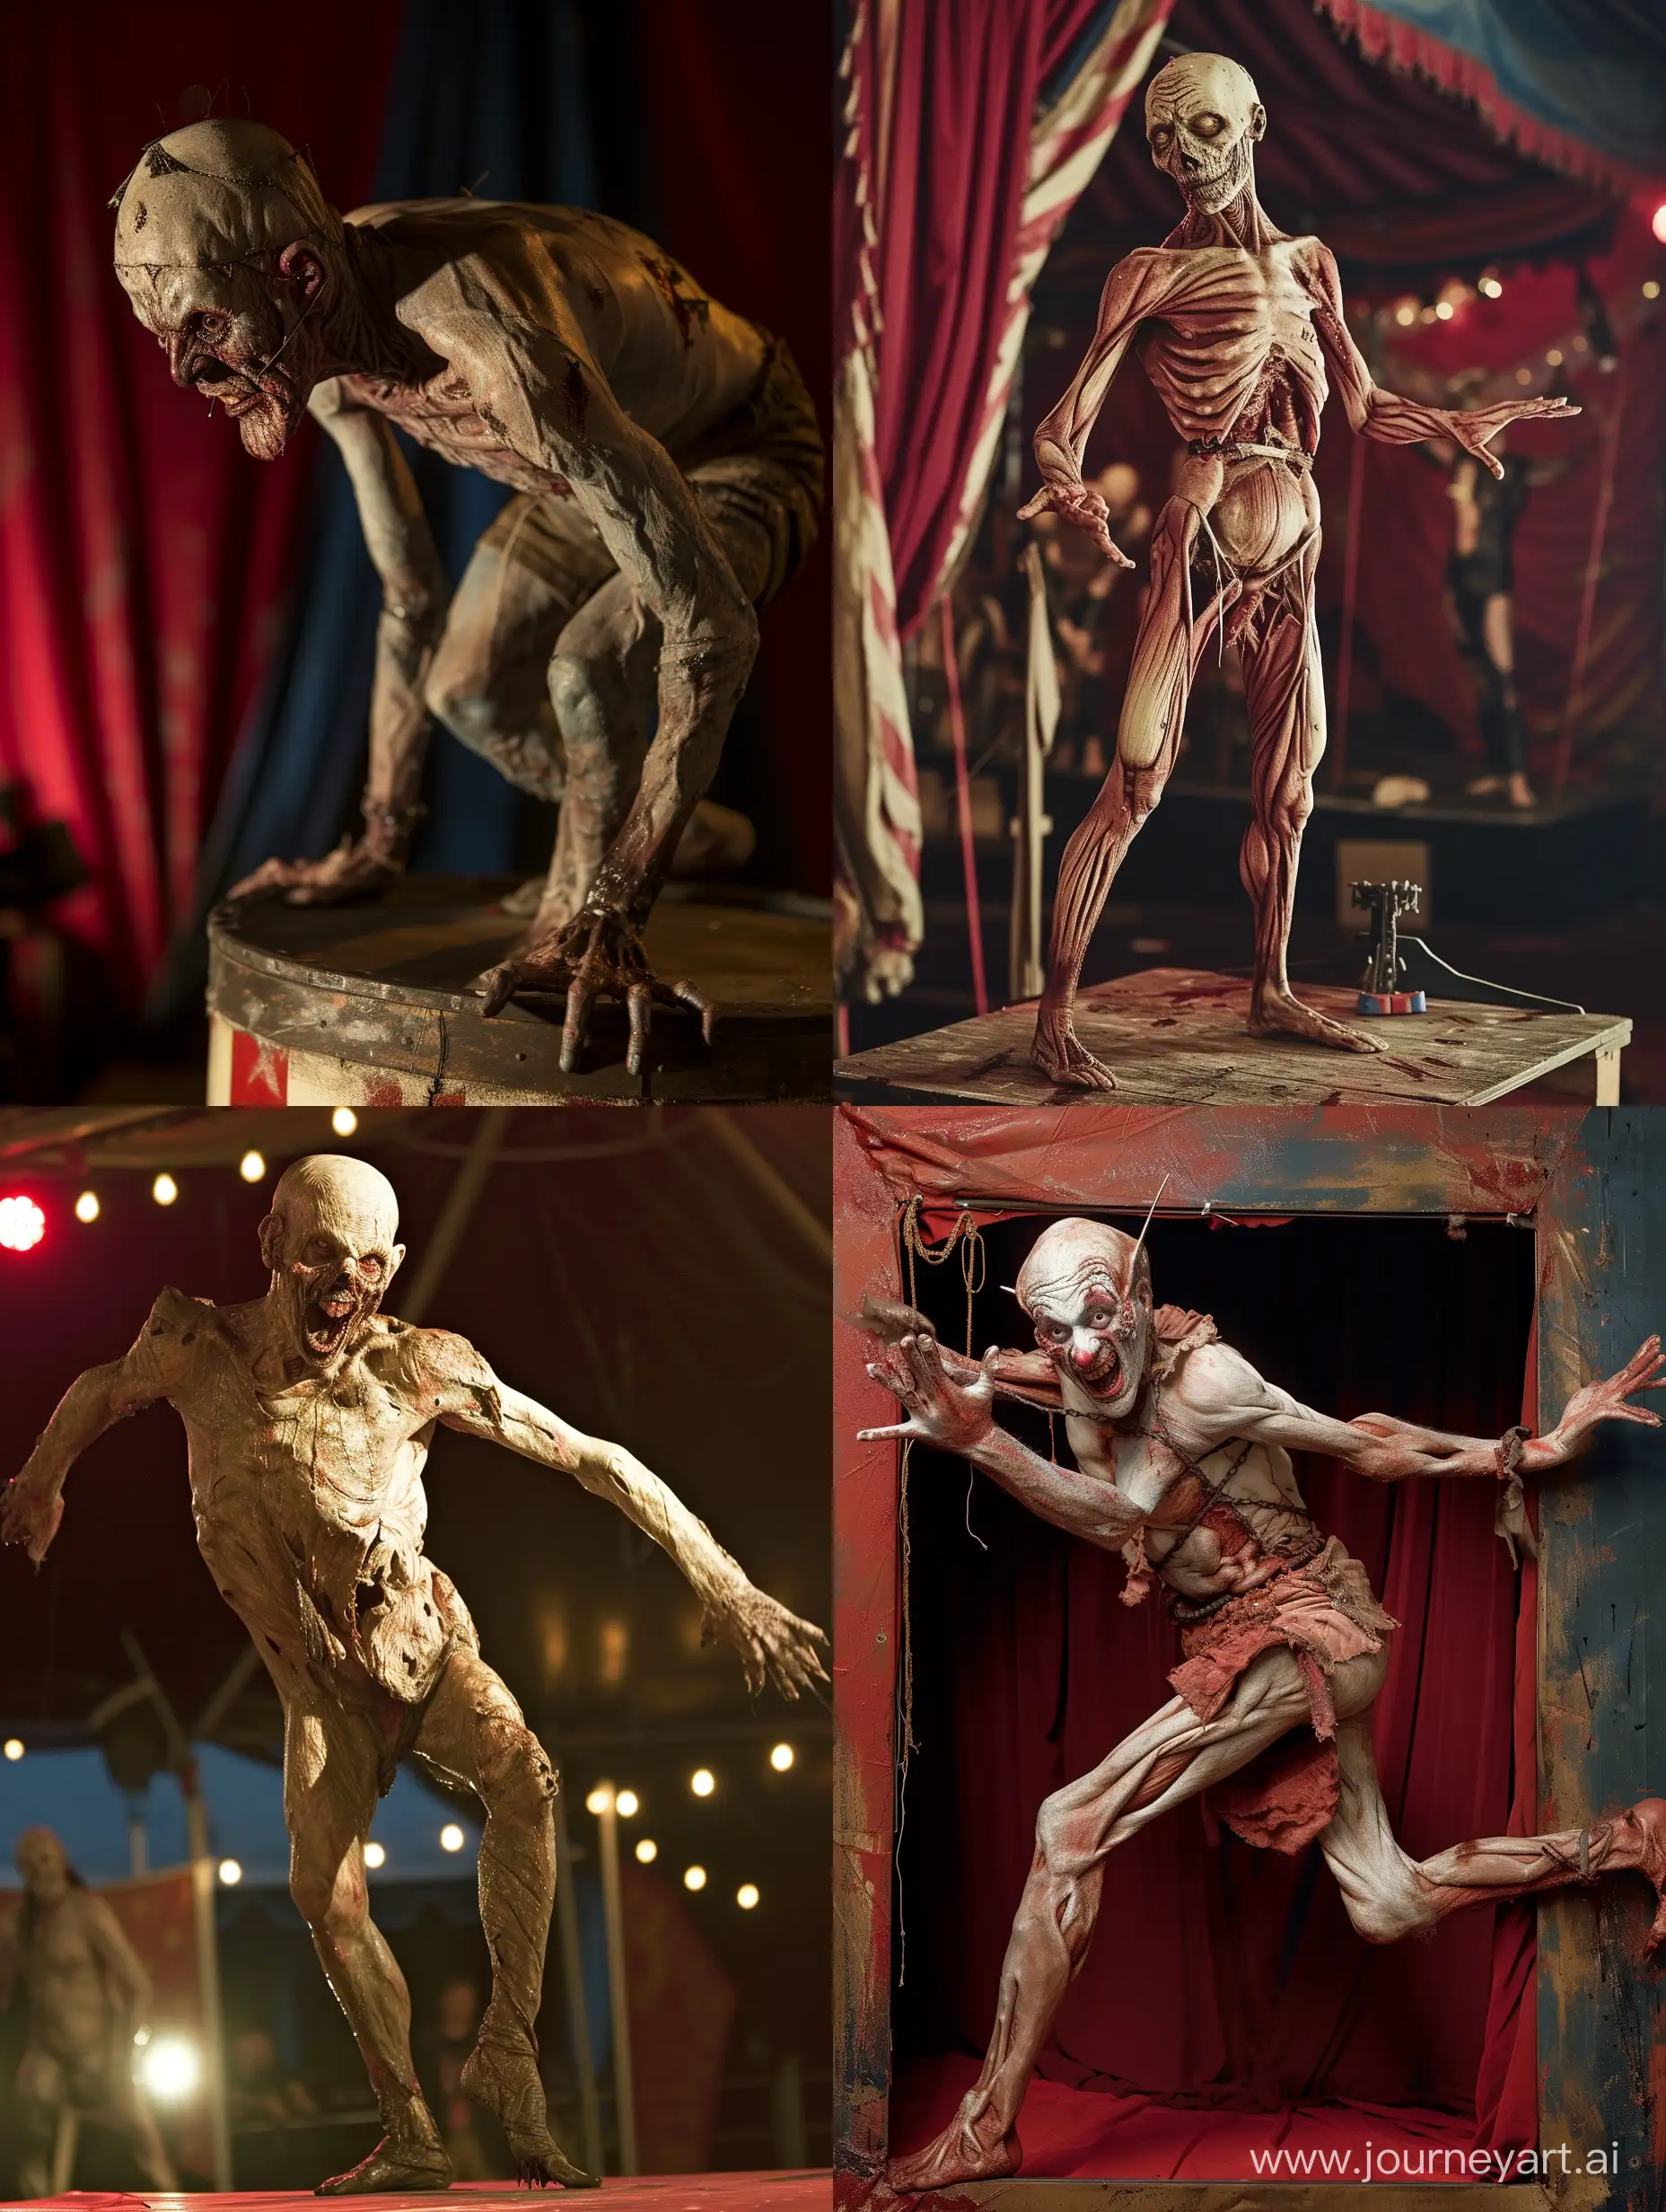 Twisted-Body-Horror-Circus-Performers-in-Shocking-Display